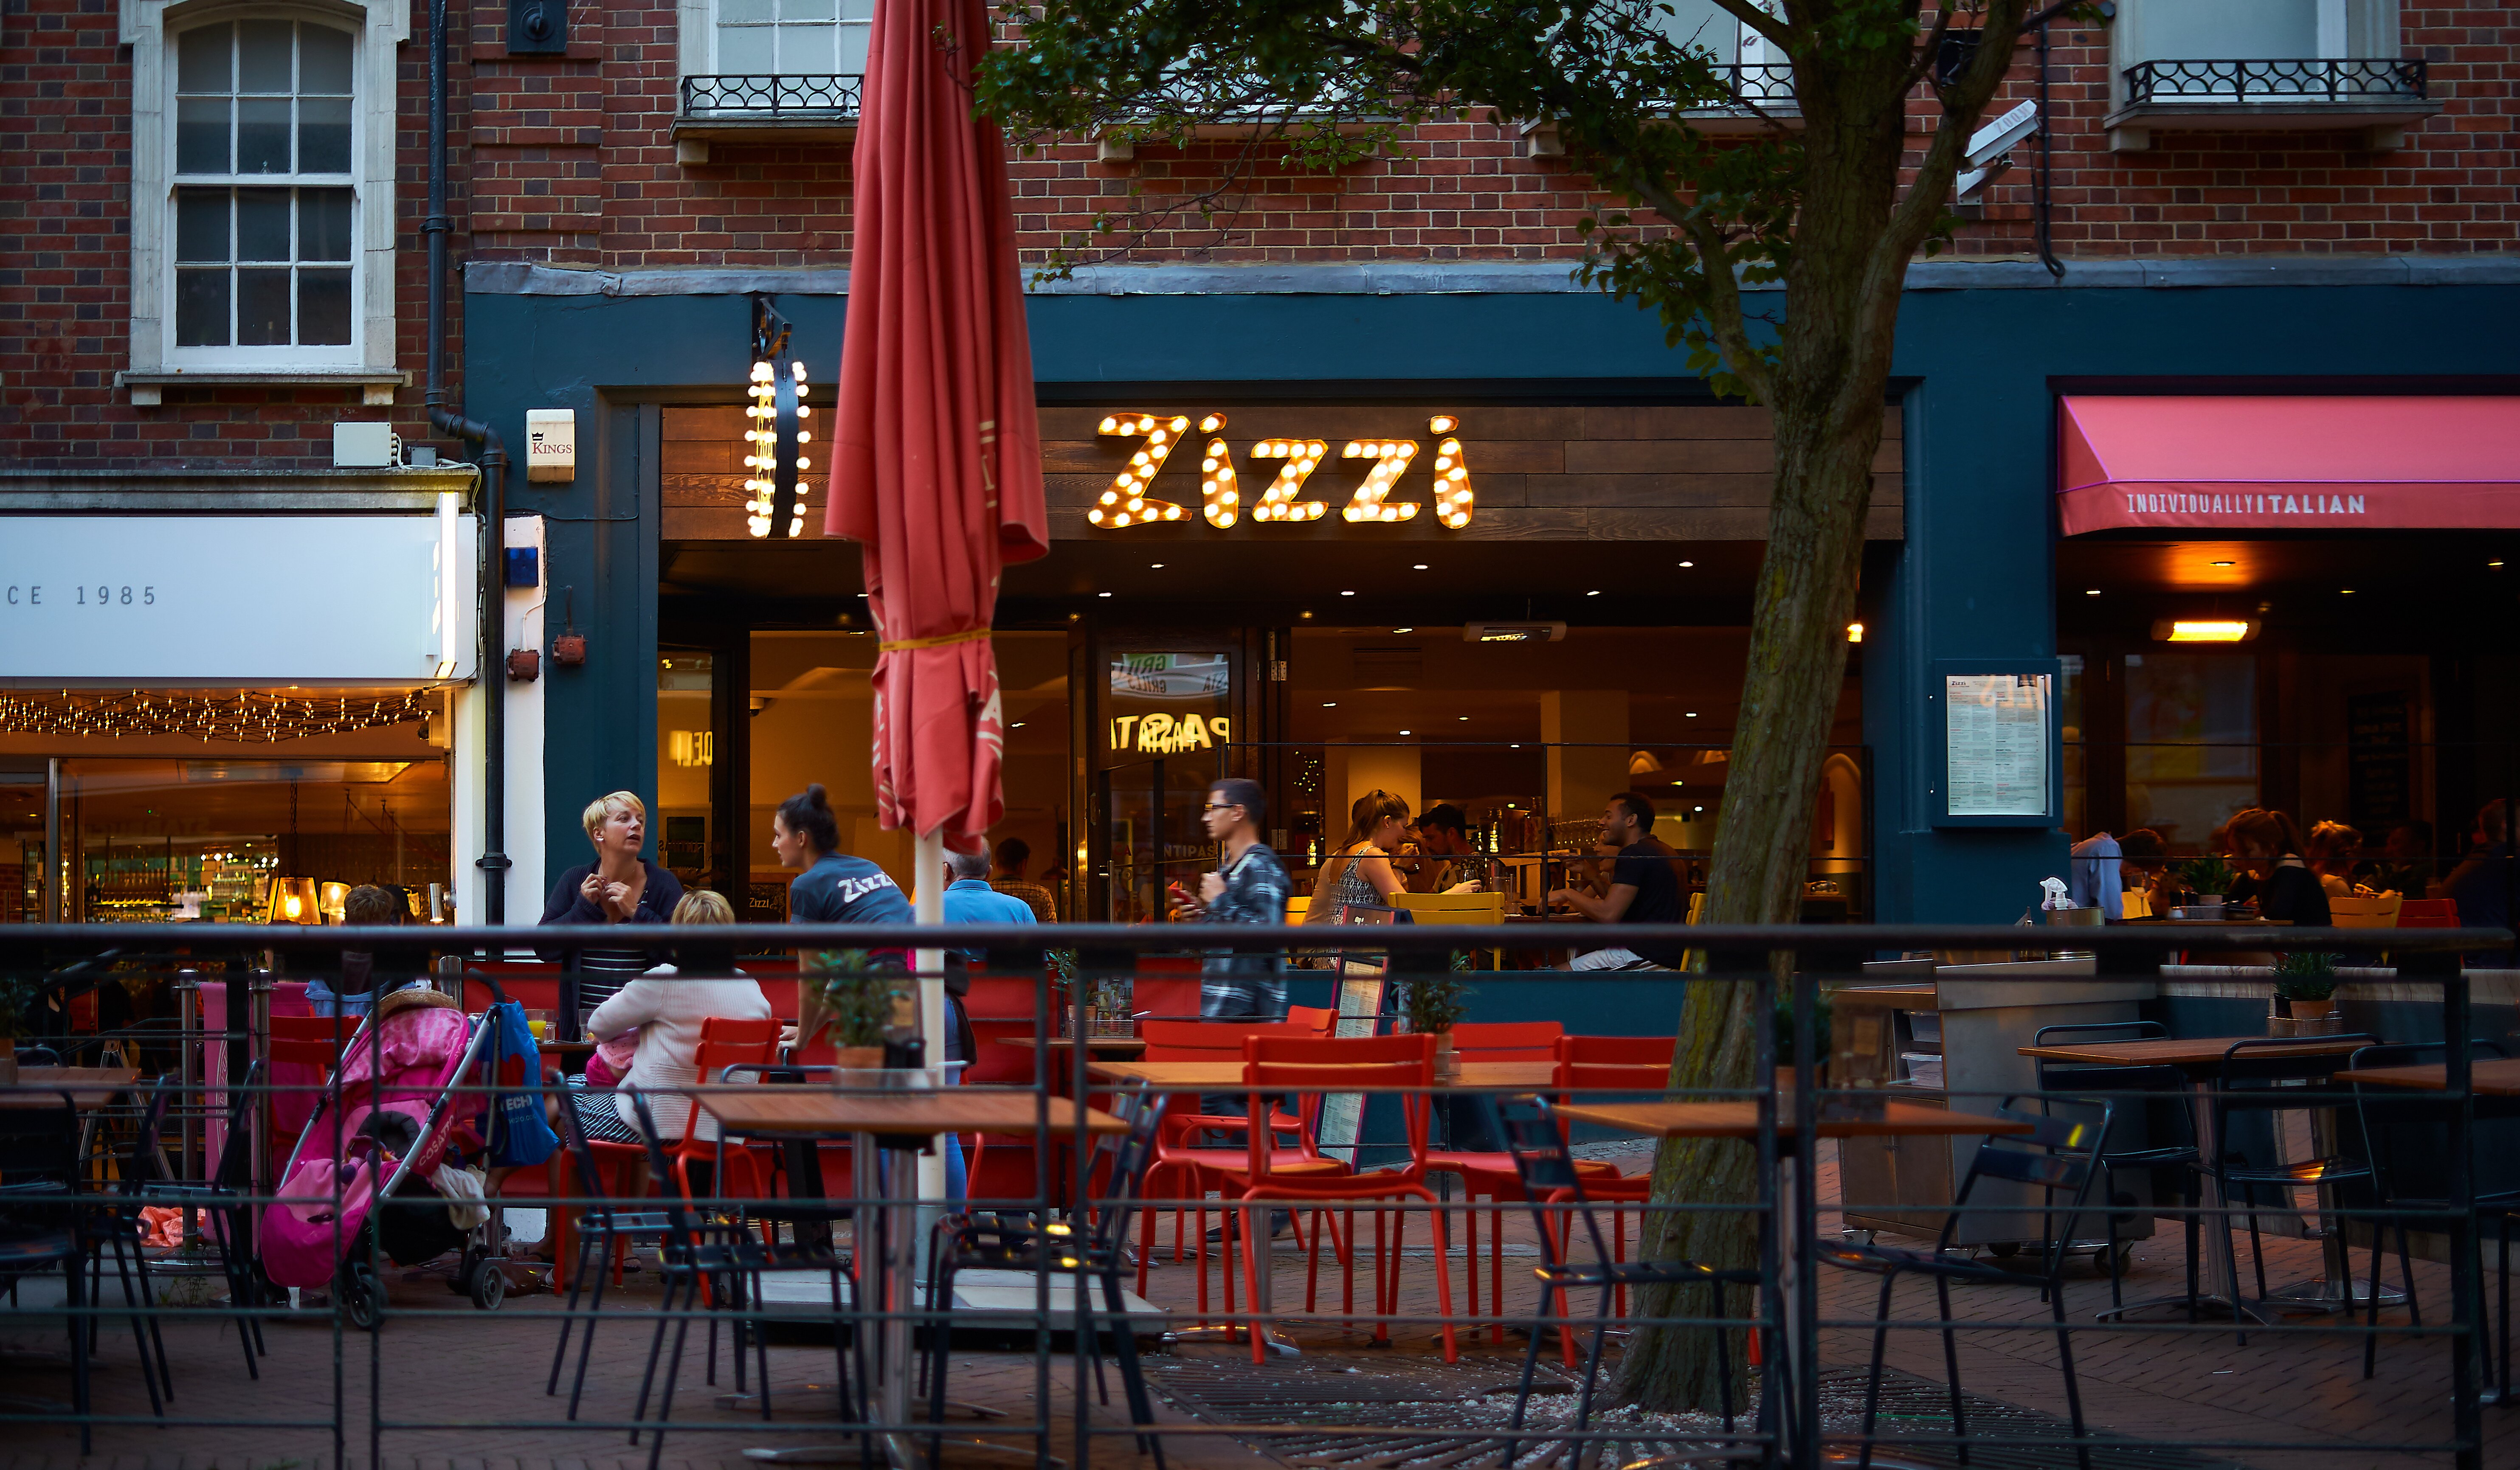 TowerBrook Capital Partners purchased Zizzi and ASK Italian owner in £109m deal